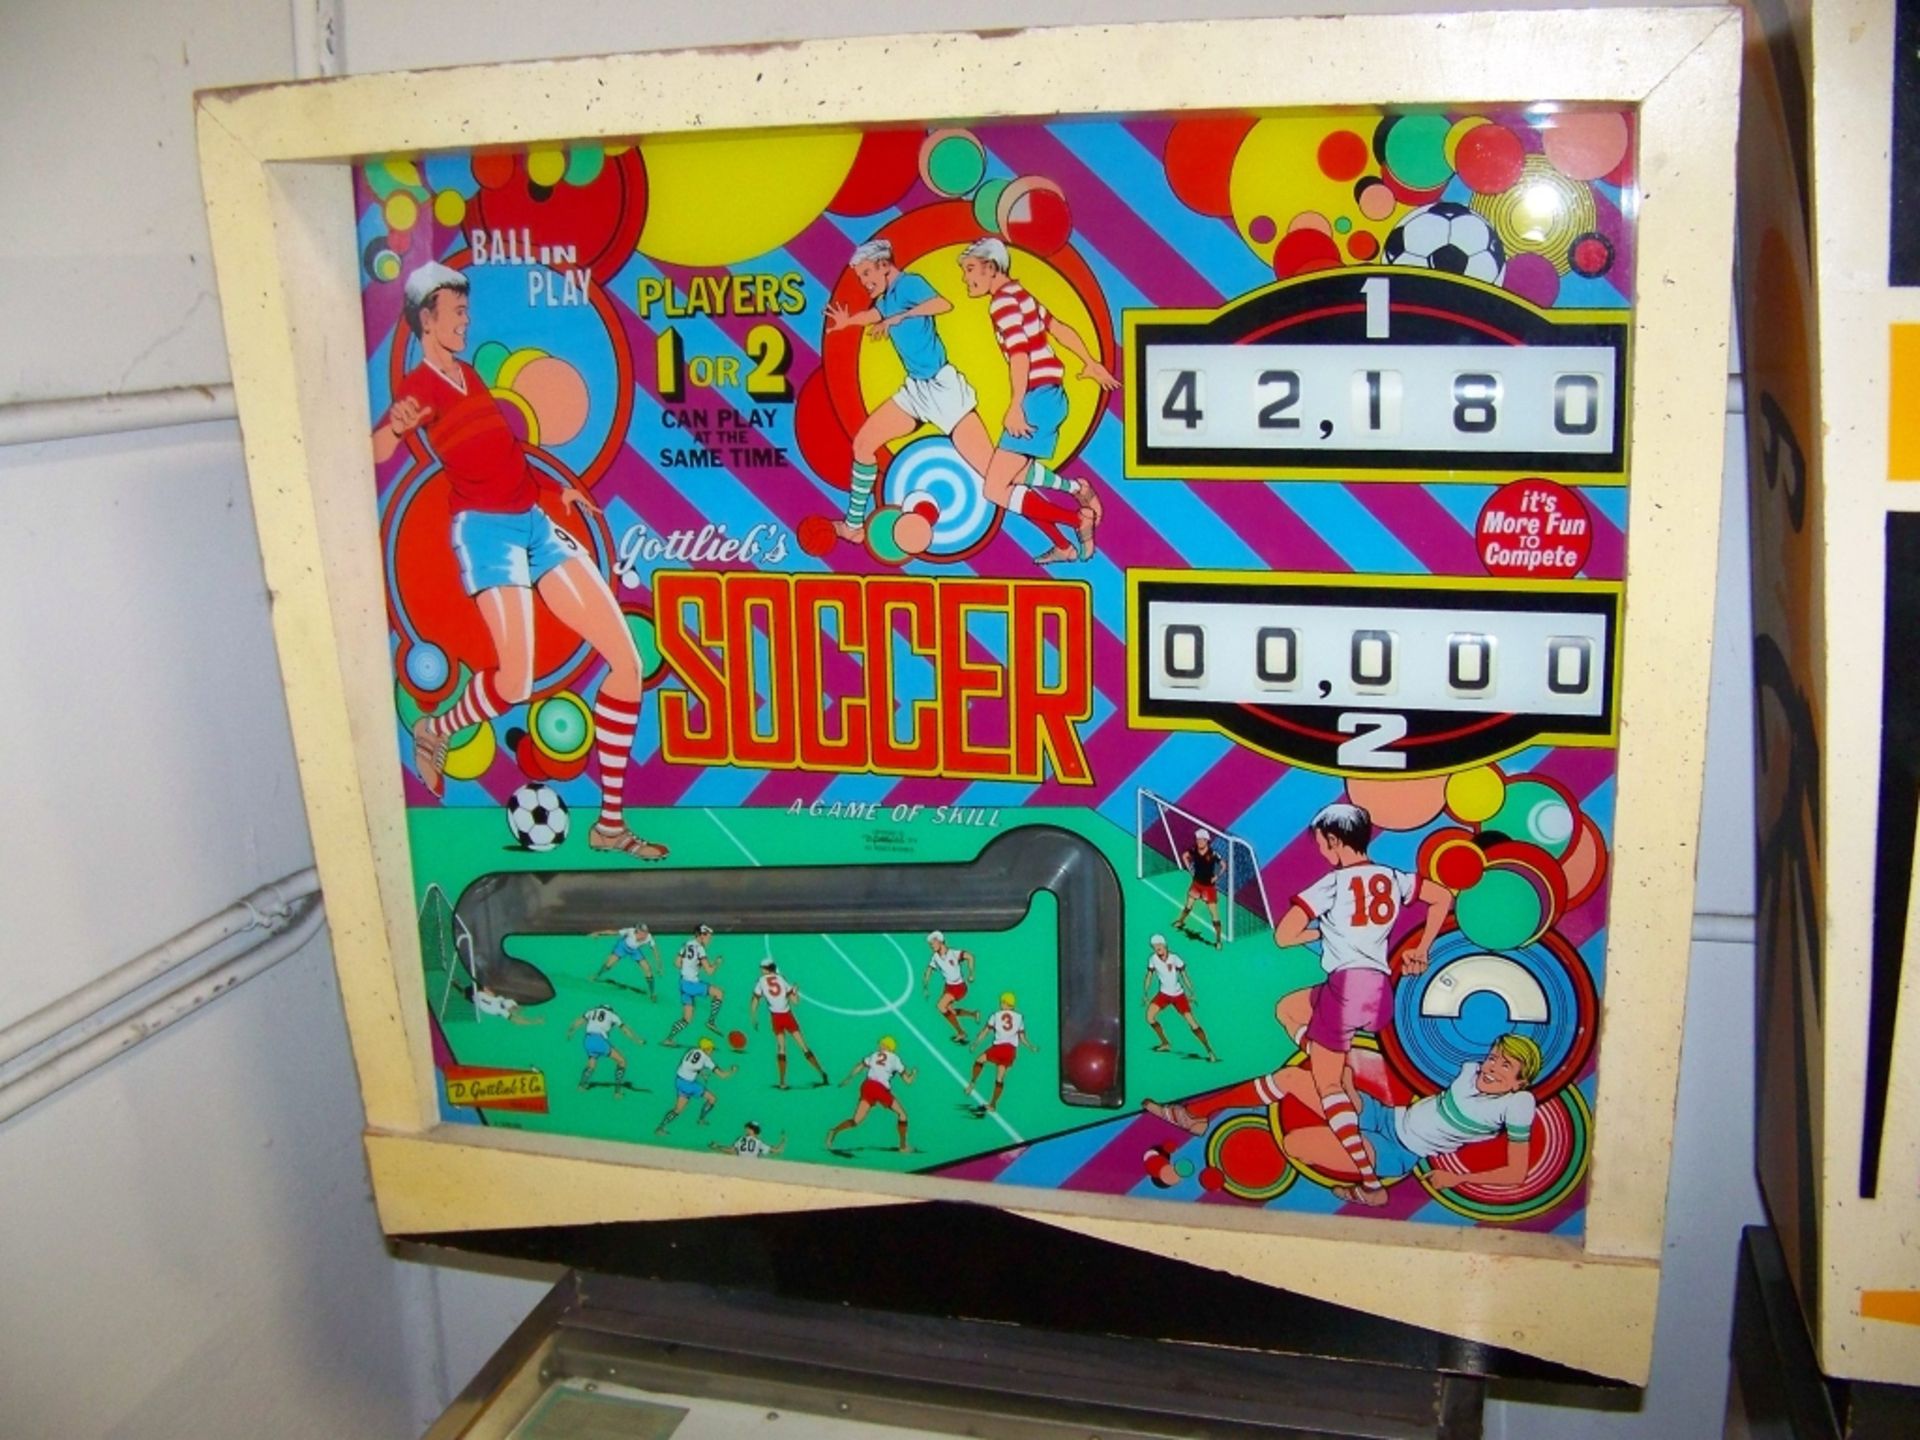 SOCCER PINBALL MACHINE ANIMATED BOX GOTTLIEB 1975 Item is in used condition. Evidence of wear and - Image 3 of 8